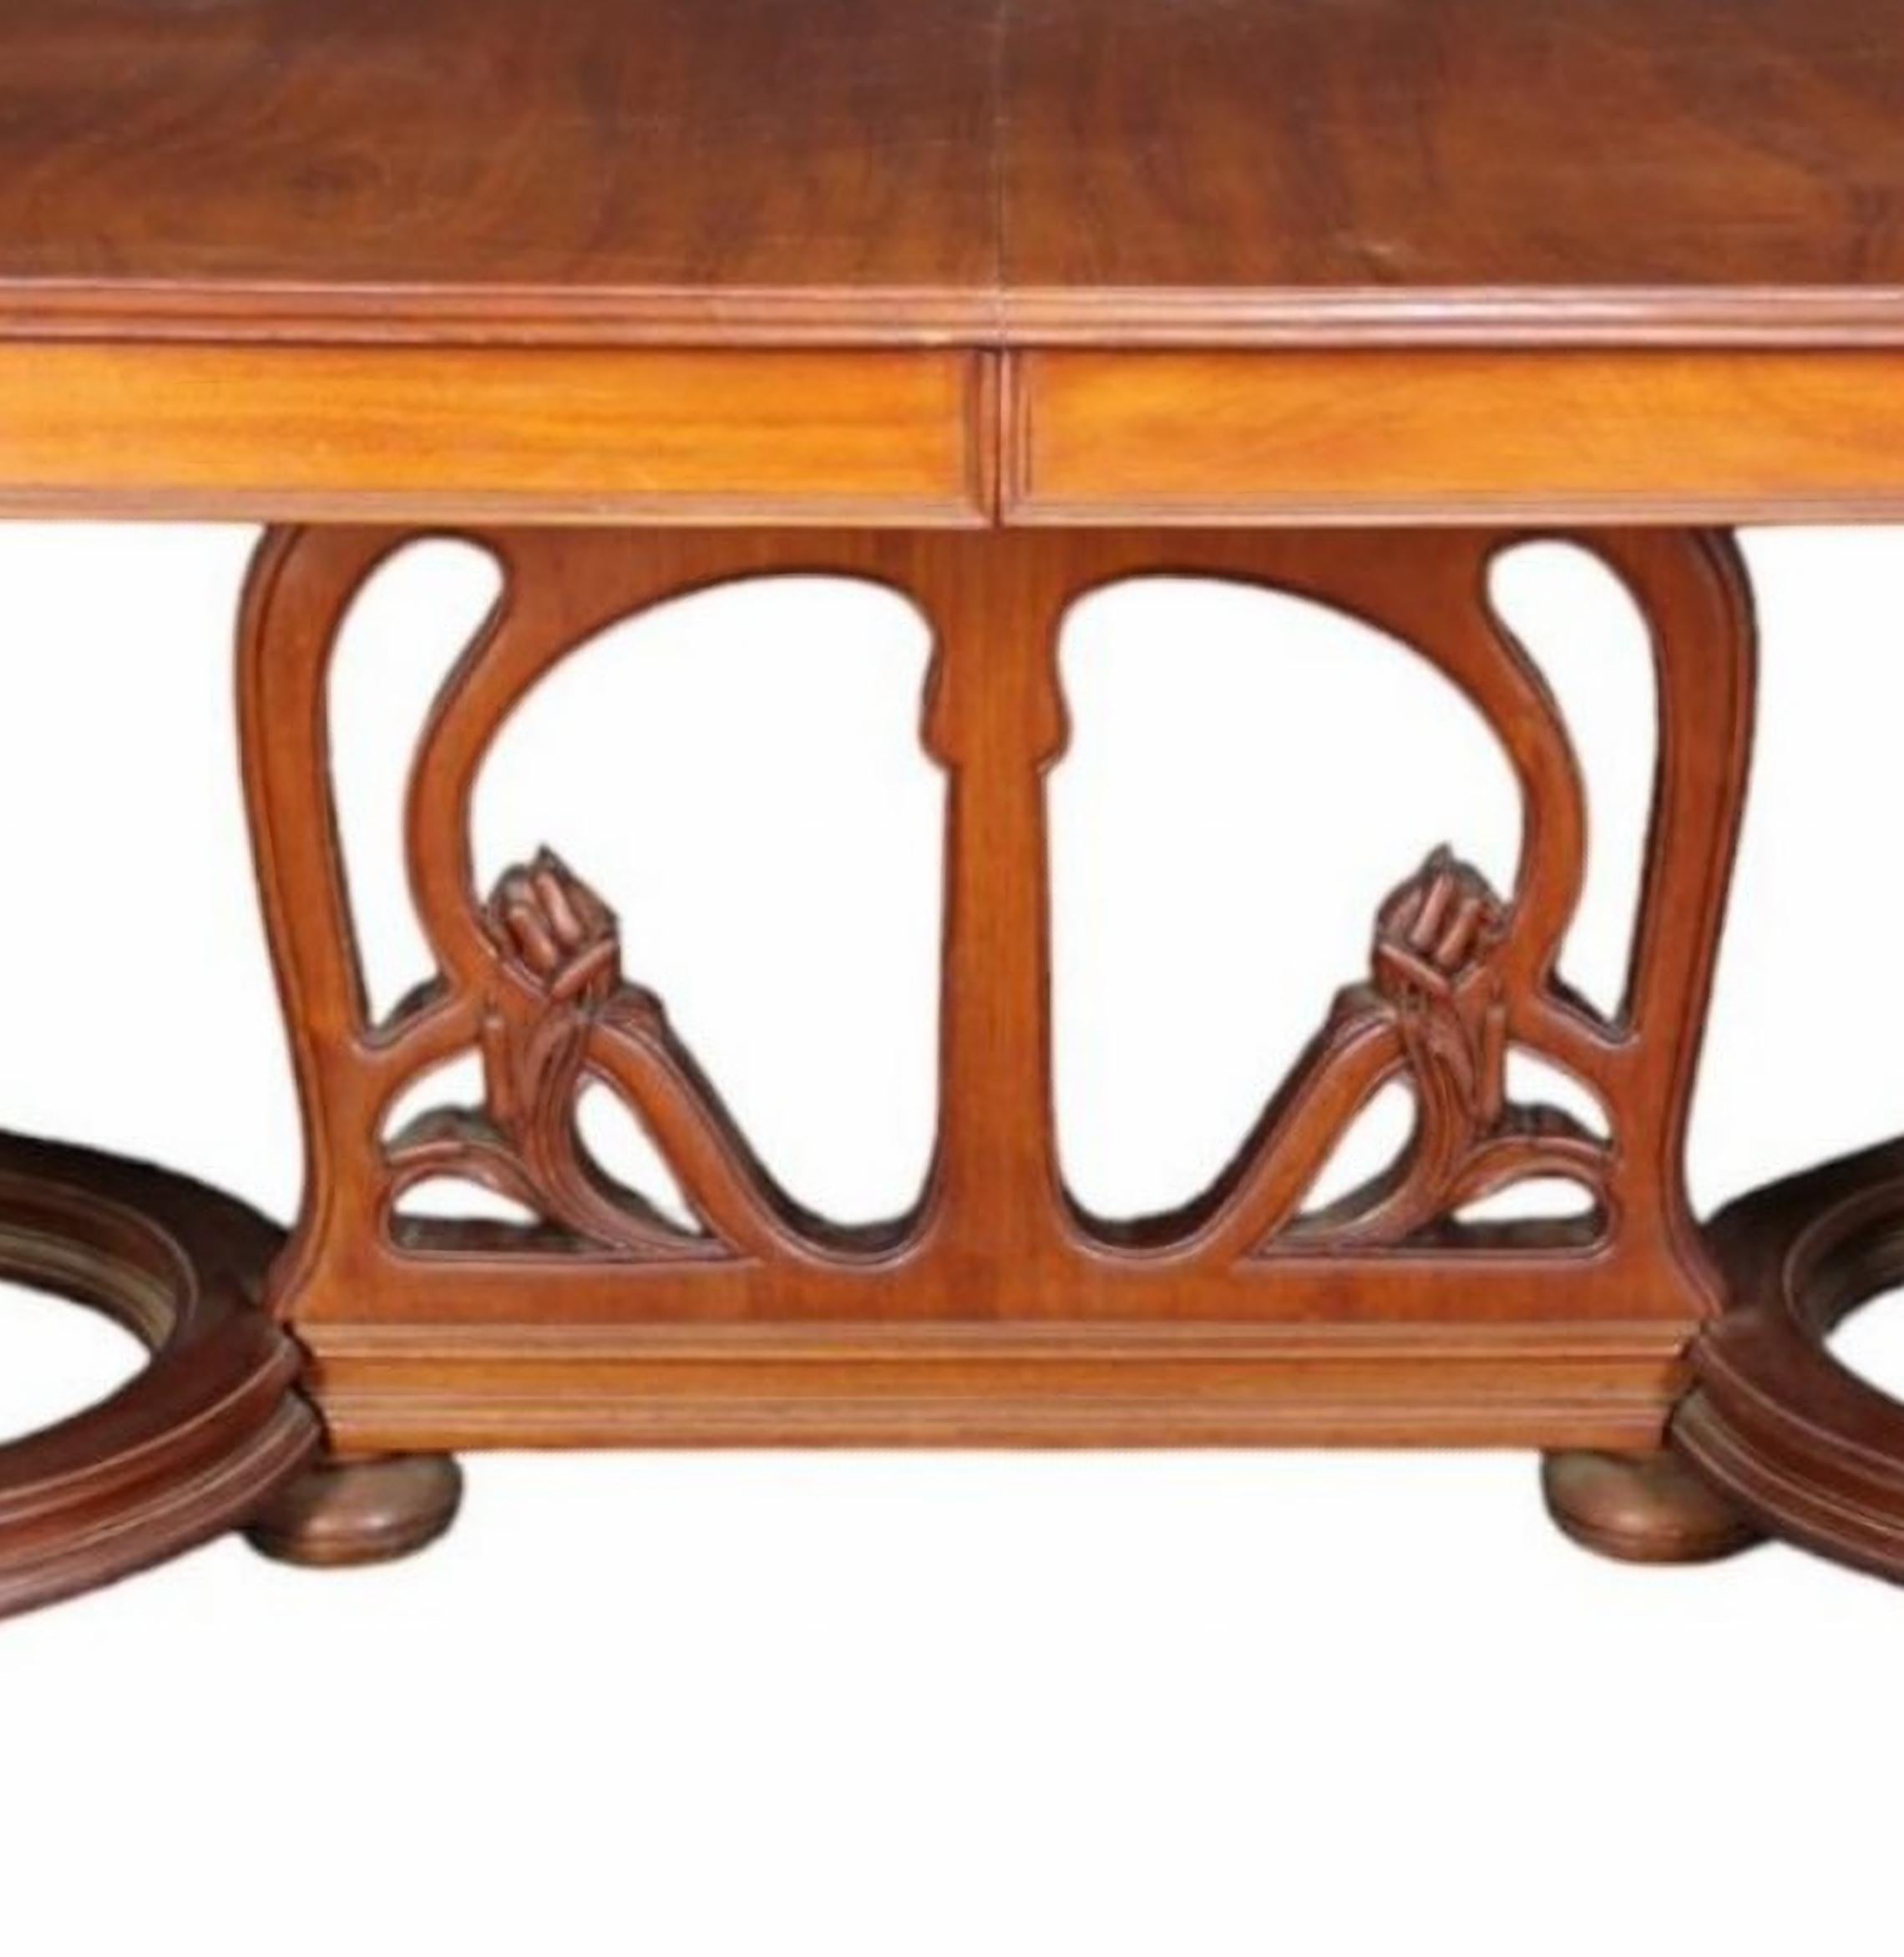 IMPORTANT LARGE 19th Century EXTENDABLE ITALIAN ART DECO TABLE
in mahogany wood with friezes carved with marsh plant motifs
h 79 x 183 x 120 cm
good conditions